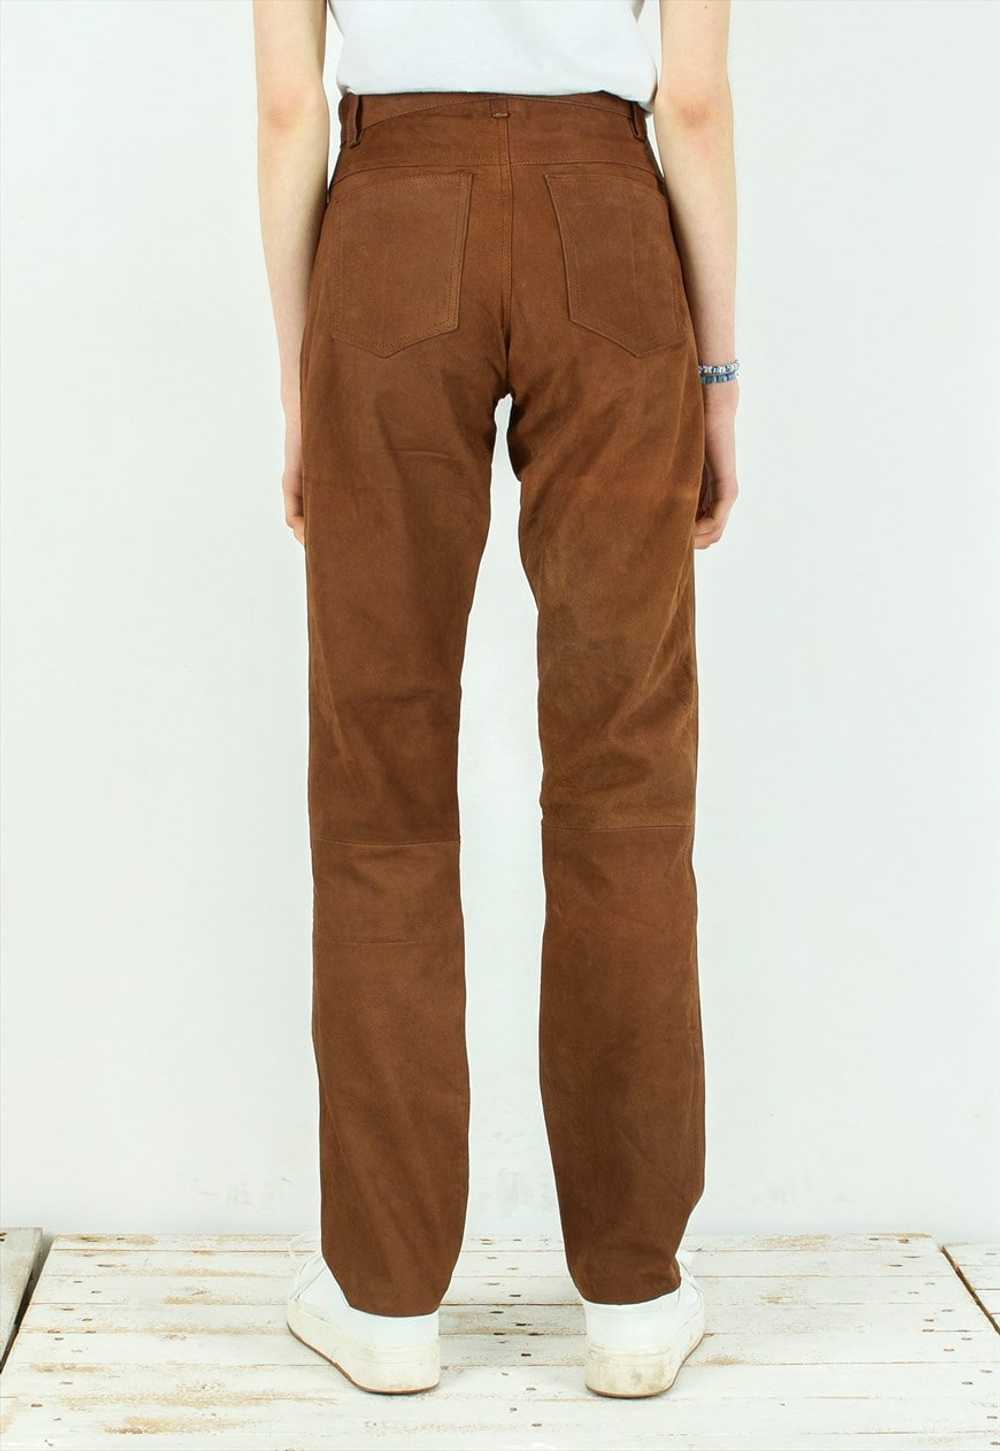 STOCKERPOINT Leather Trousers Straight Pants Cowb… - image 3